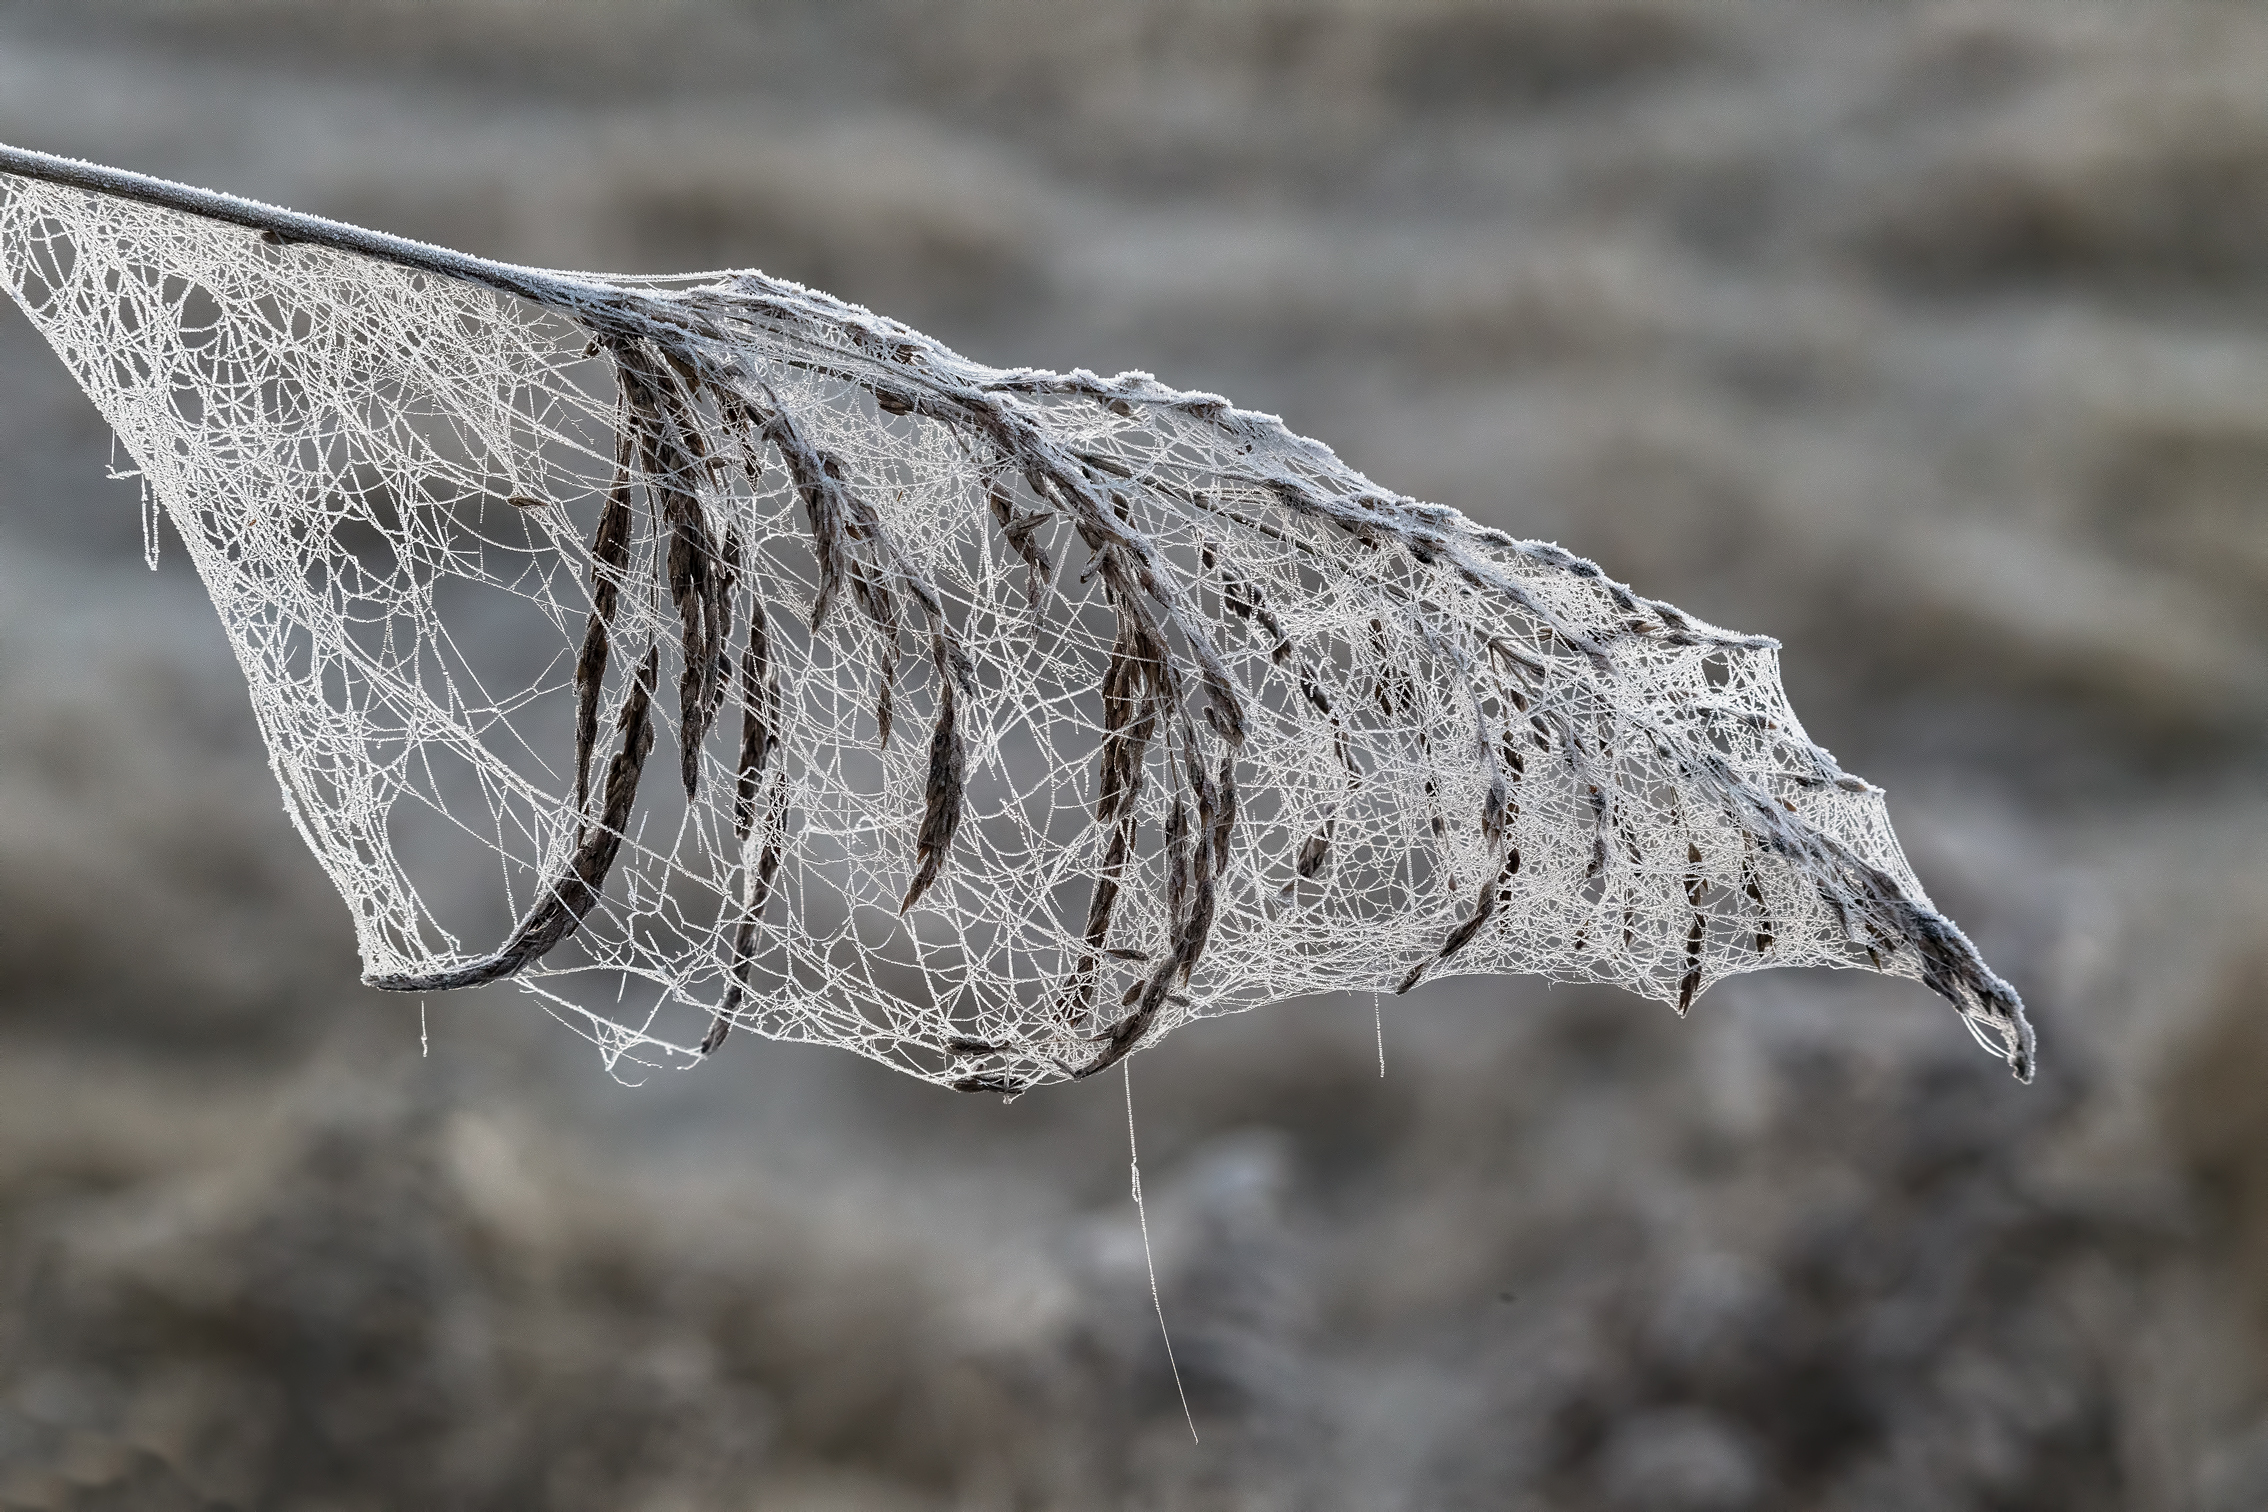 the ragratela that envelops the frost freezes the embrace...